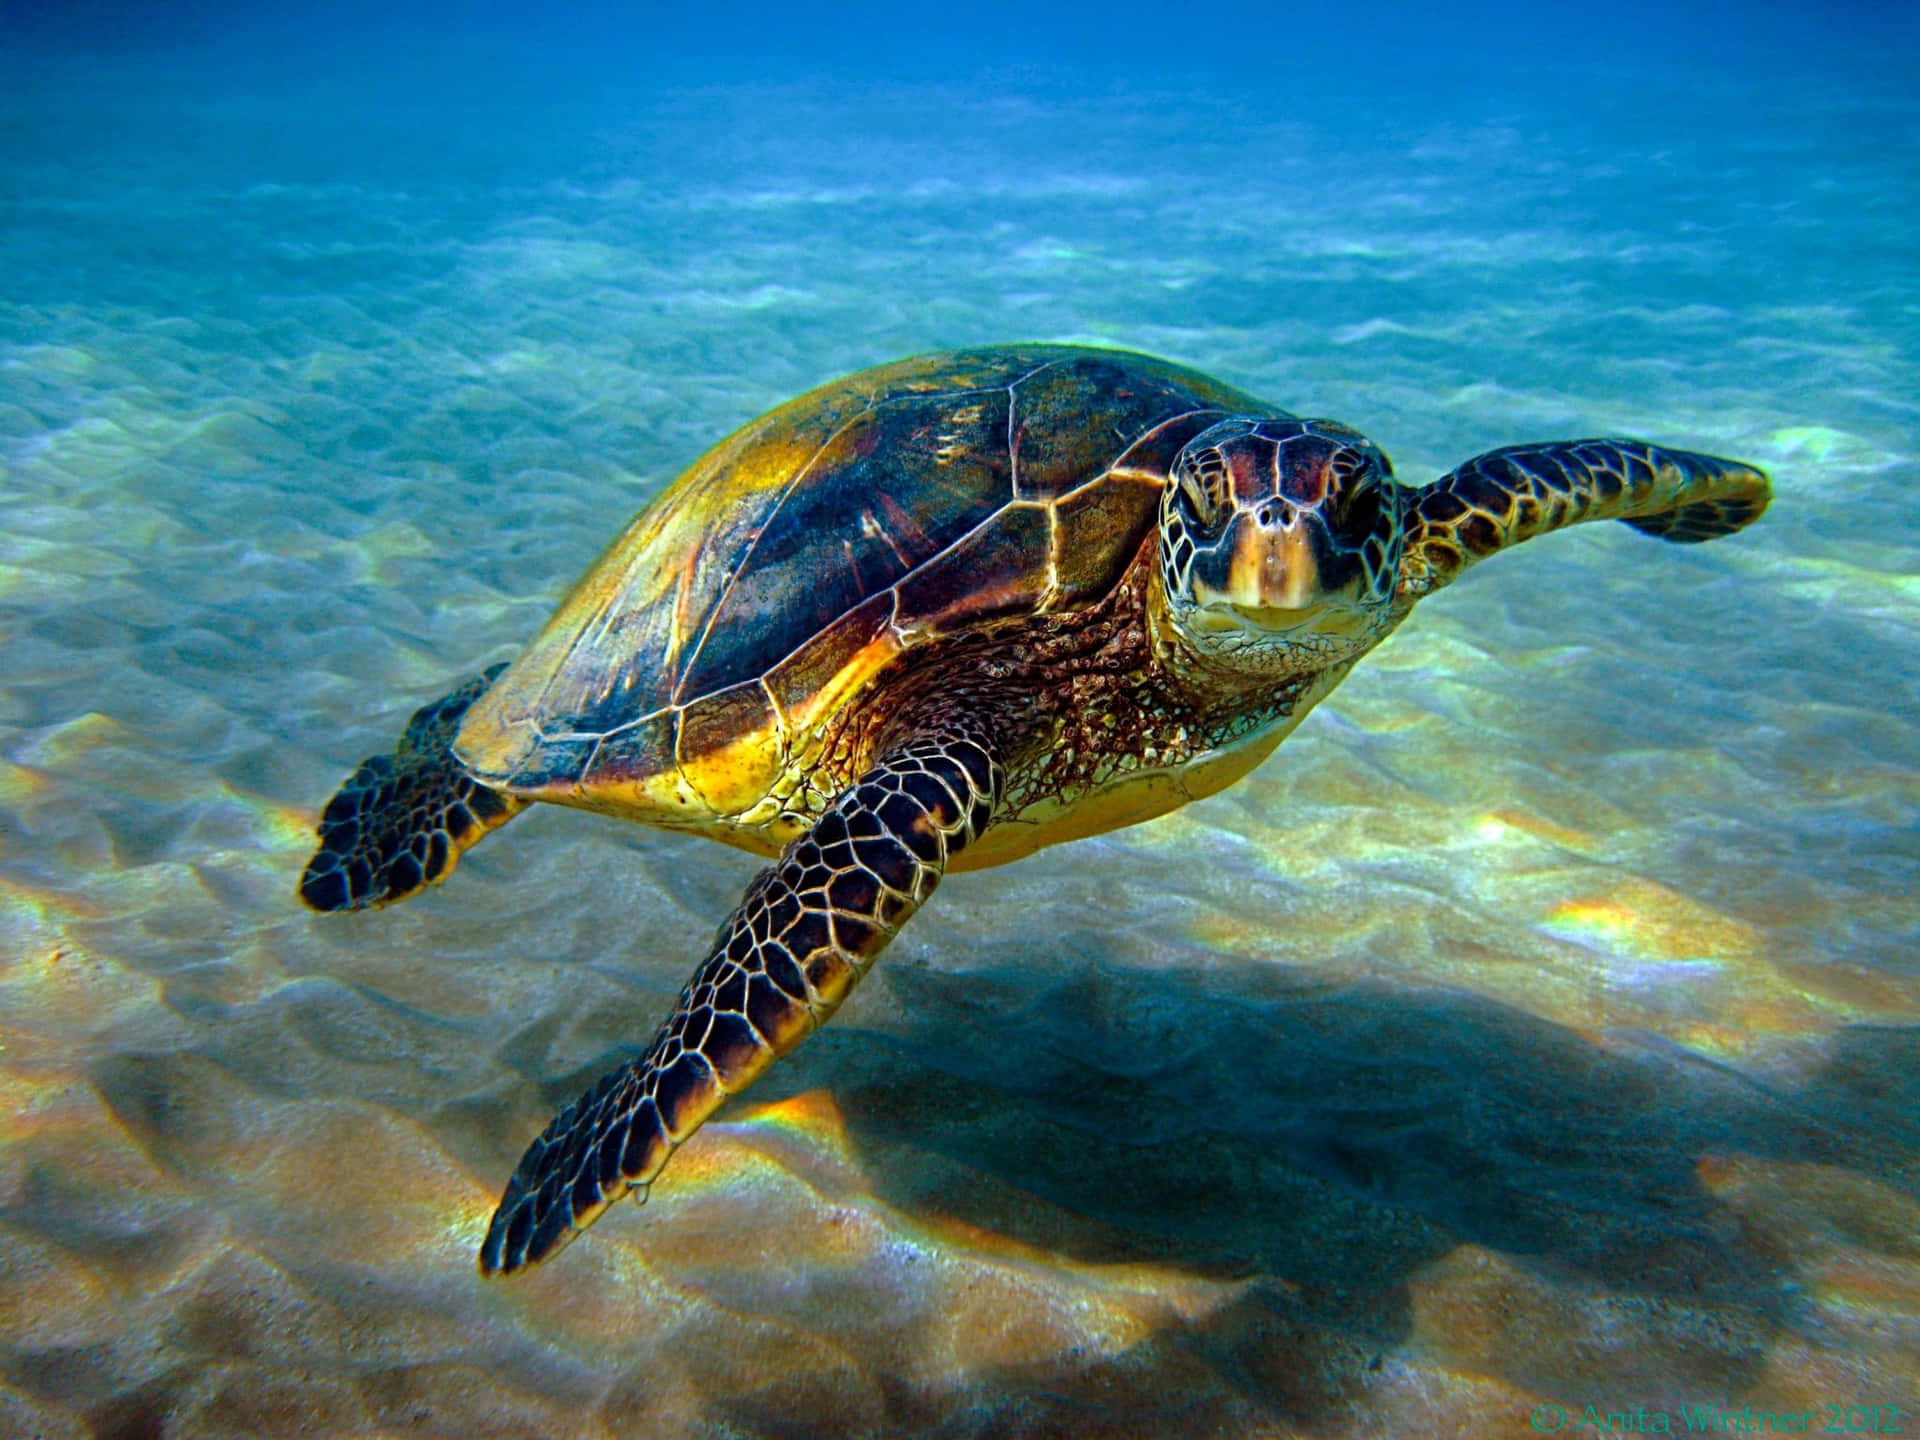 A peacefully swimming sea turtle in the calm and clear waters of the Caribbean.